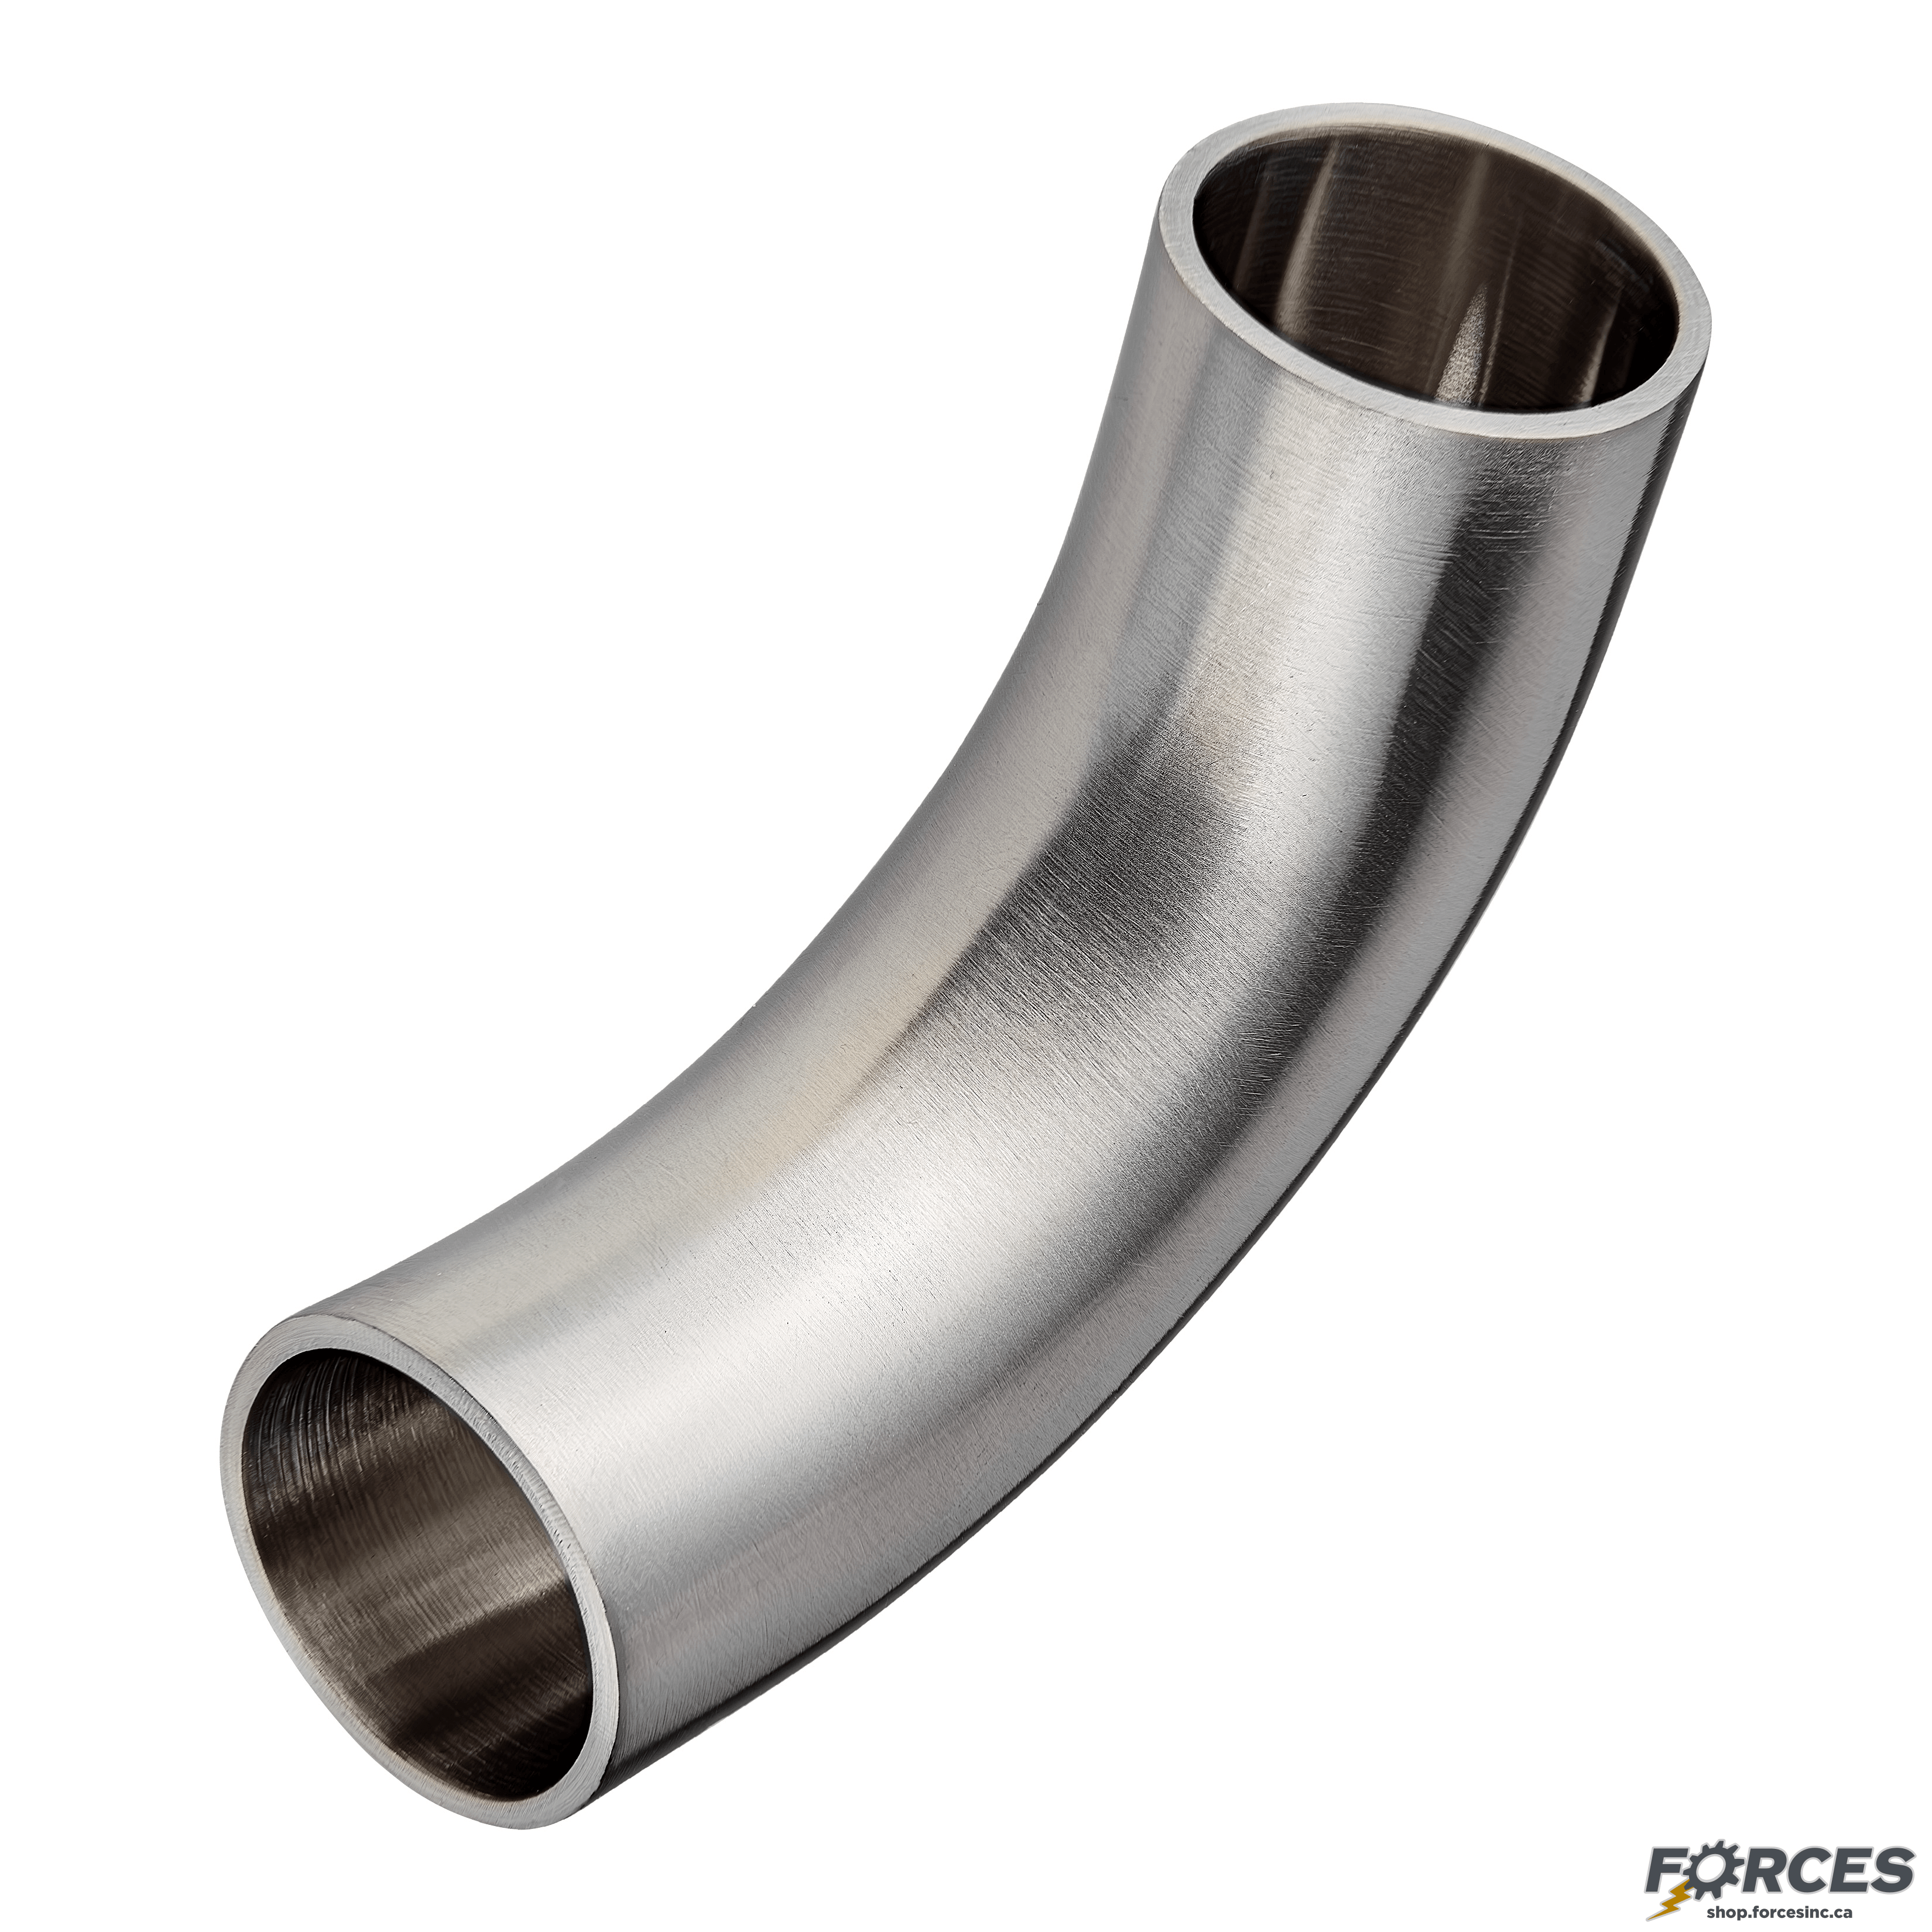 2-1/2" Butt Weld 90° Elbow Long Tangent - Stainless Steel 316 - Forces Inc